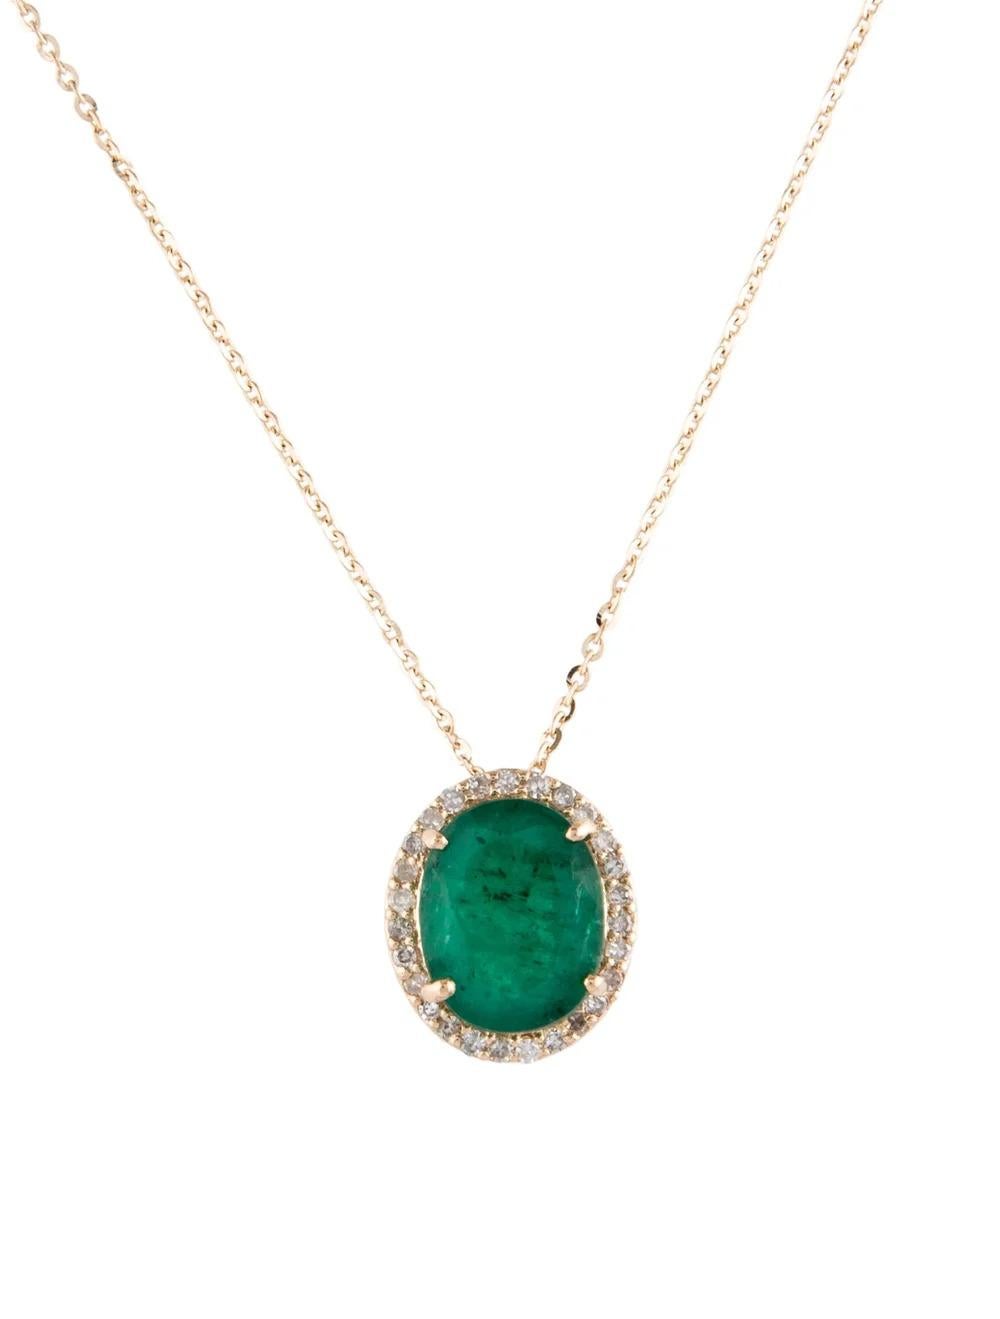 Elevate your style with this stunning 14K yellow gold pendant necklace, adorned with a captivating 1.982 carat oval brilliant emerald and 0.14 carats of dazzling single-cut diamonds. Crafted to perfection, this exquisite piece exudes sophistication